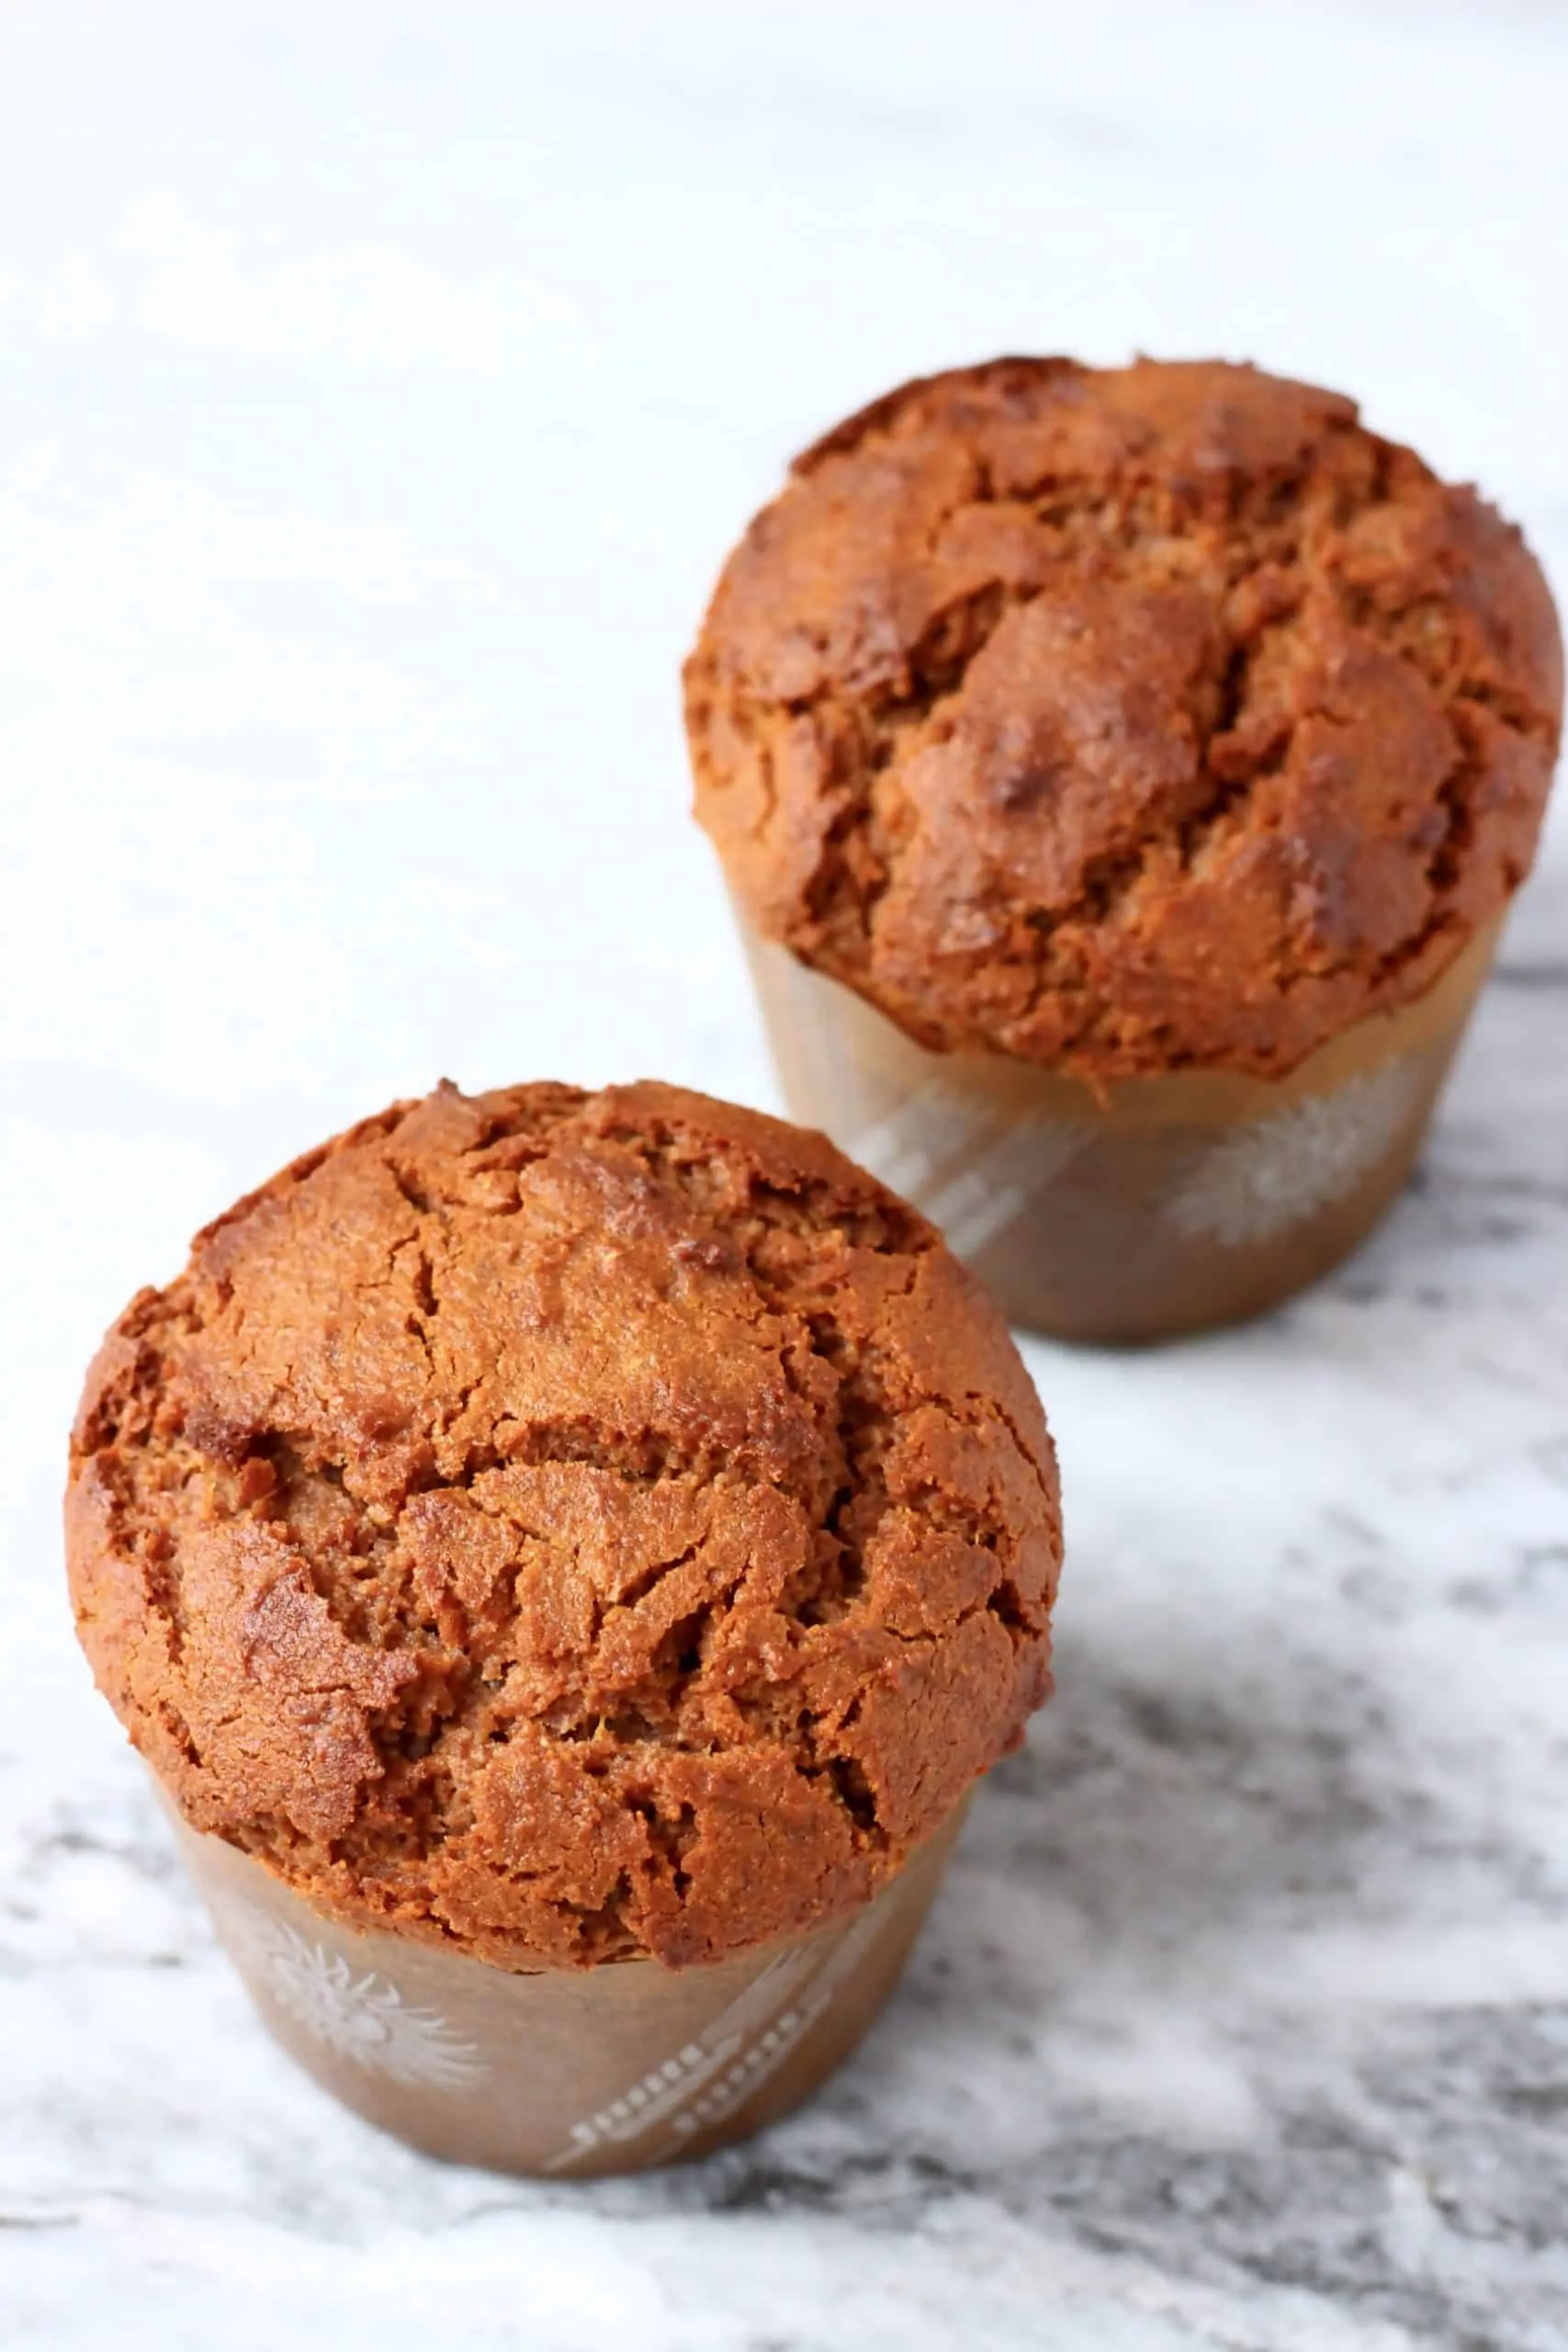 Two gluten-free vegan gingerbread muffins in brown muffin cases